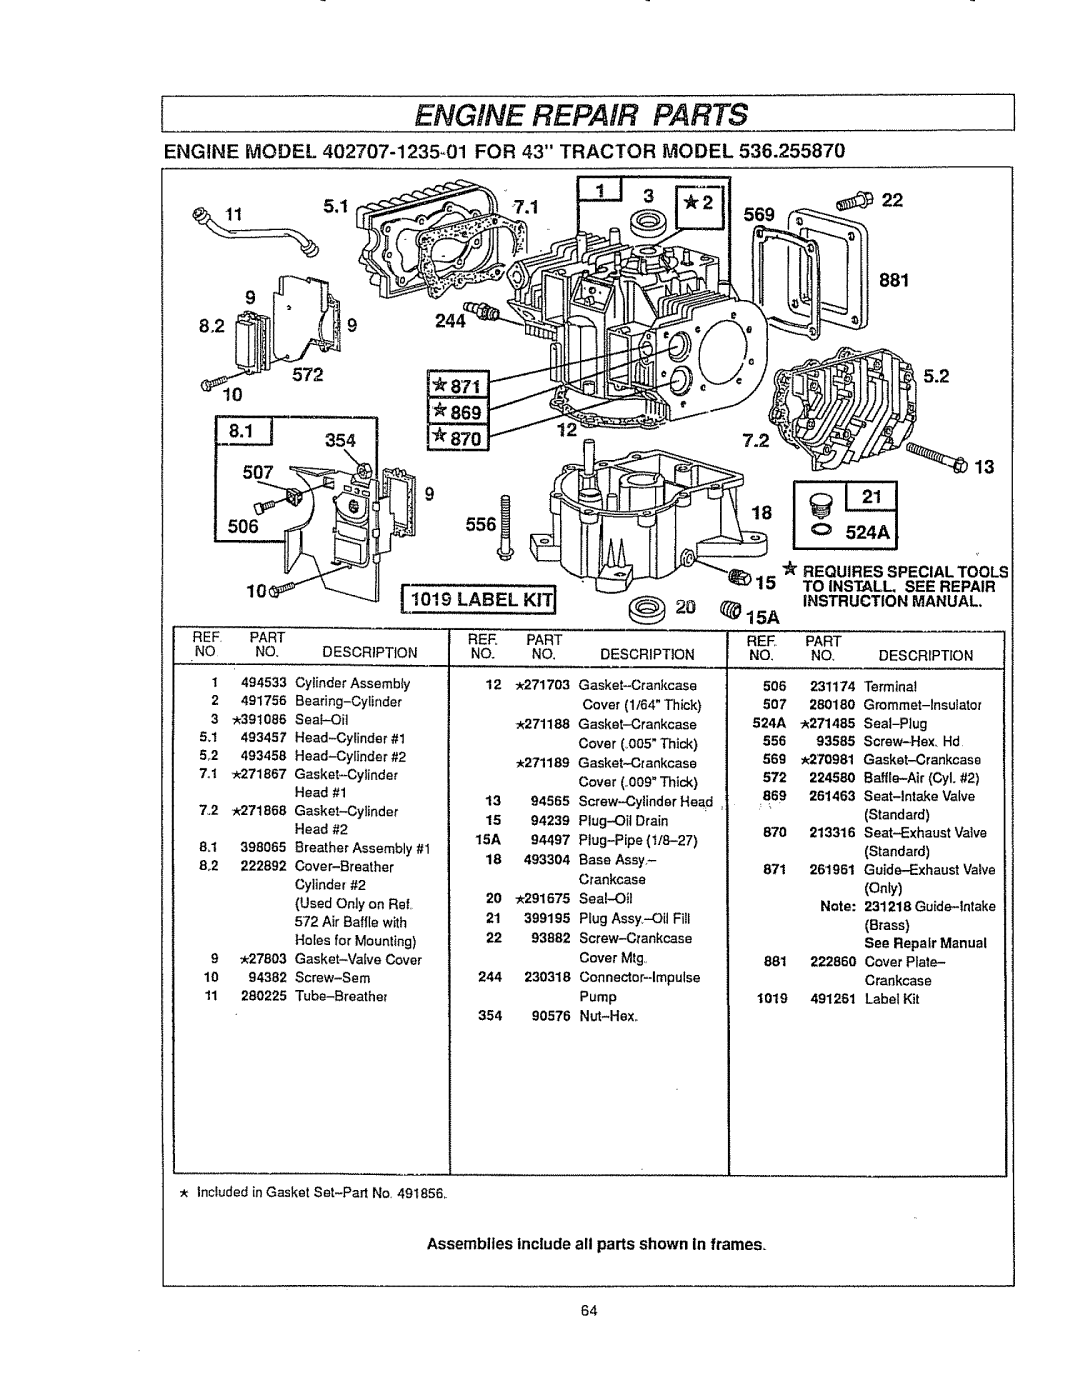 Sears 536.25587 s.1322, 524AI, Engine Repair Parts, 9 556_, 881 5.2 7.2, _15A, Instruction Manual, Requires, Special Tools 